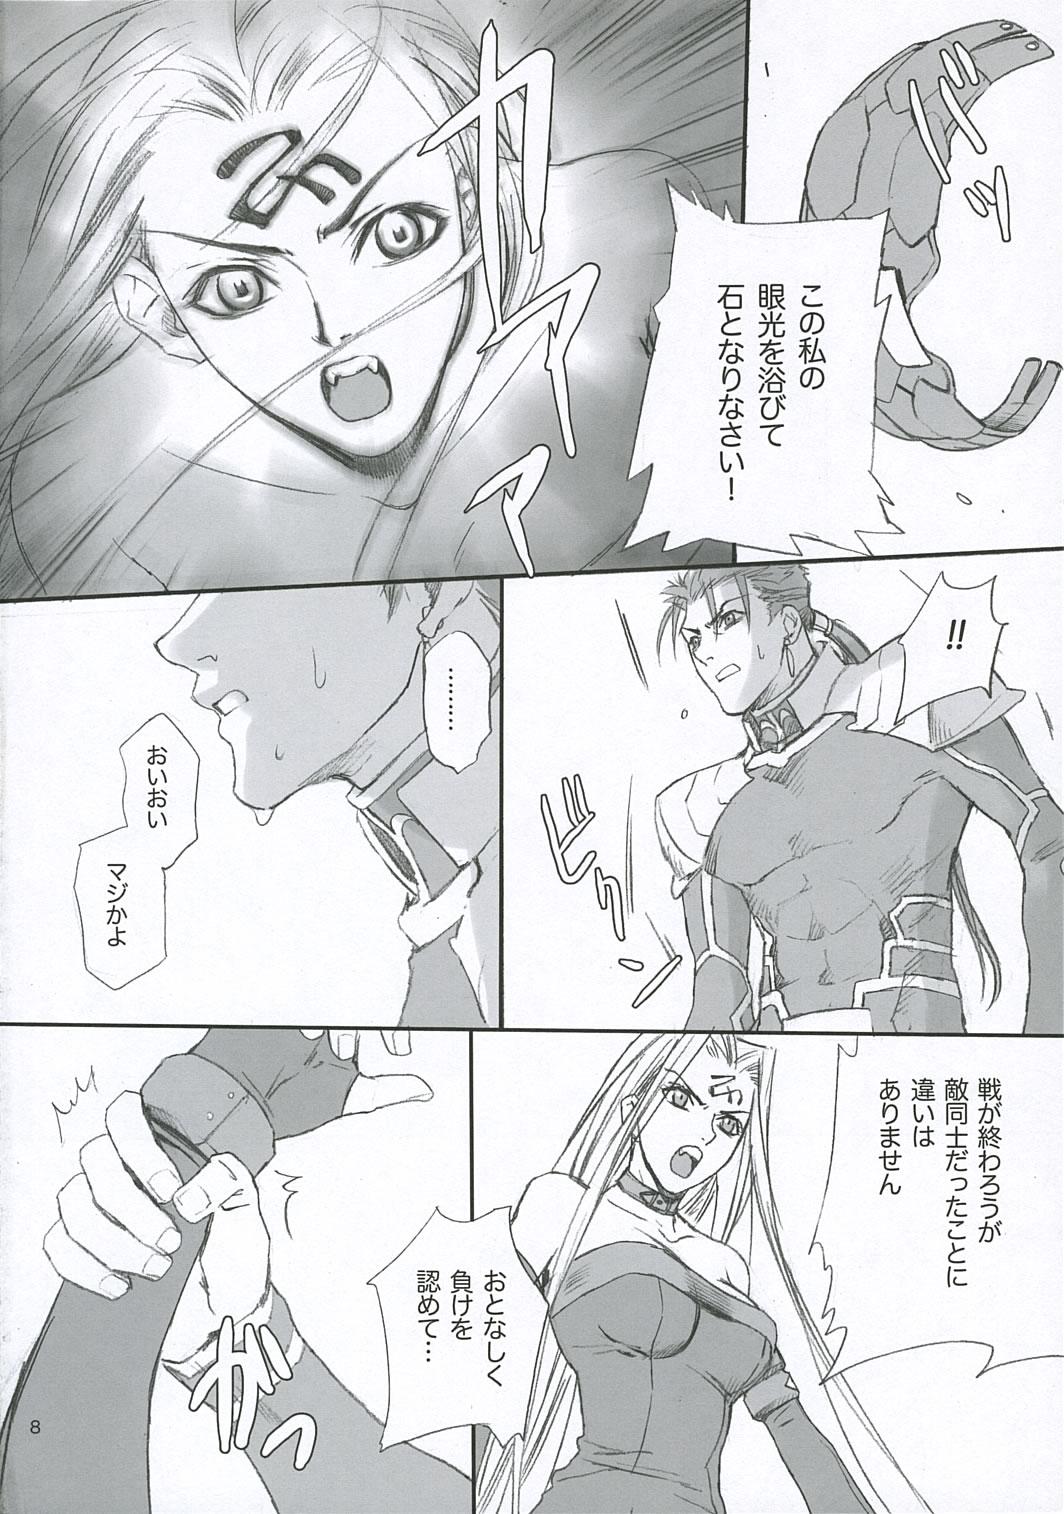 Blow Job Lancer Evolution - Fate stay night Ano - Page 7